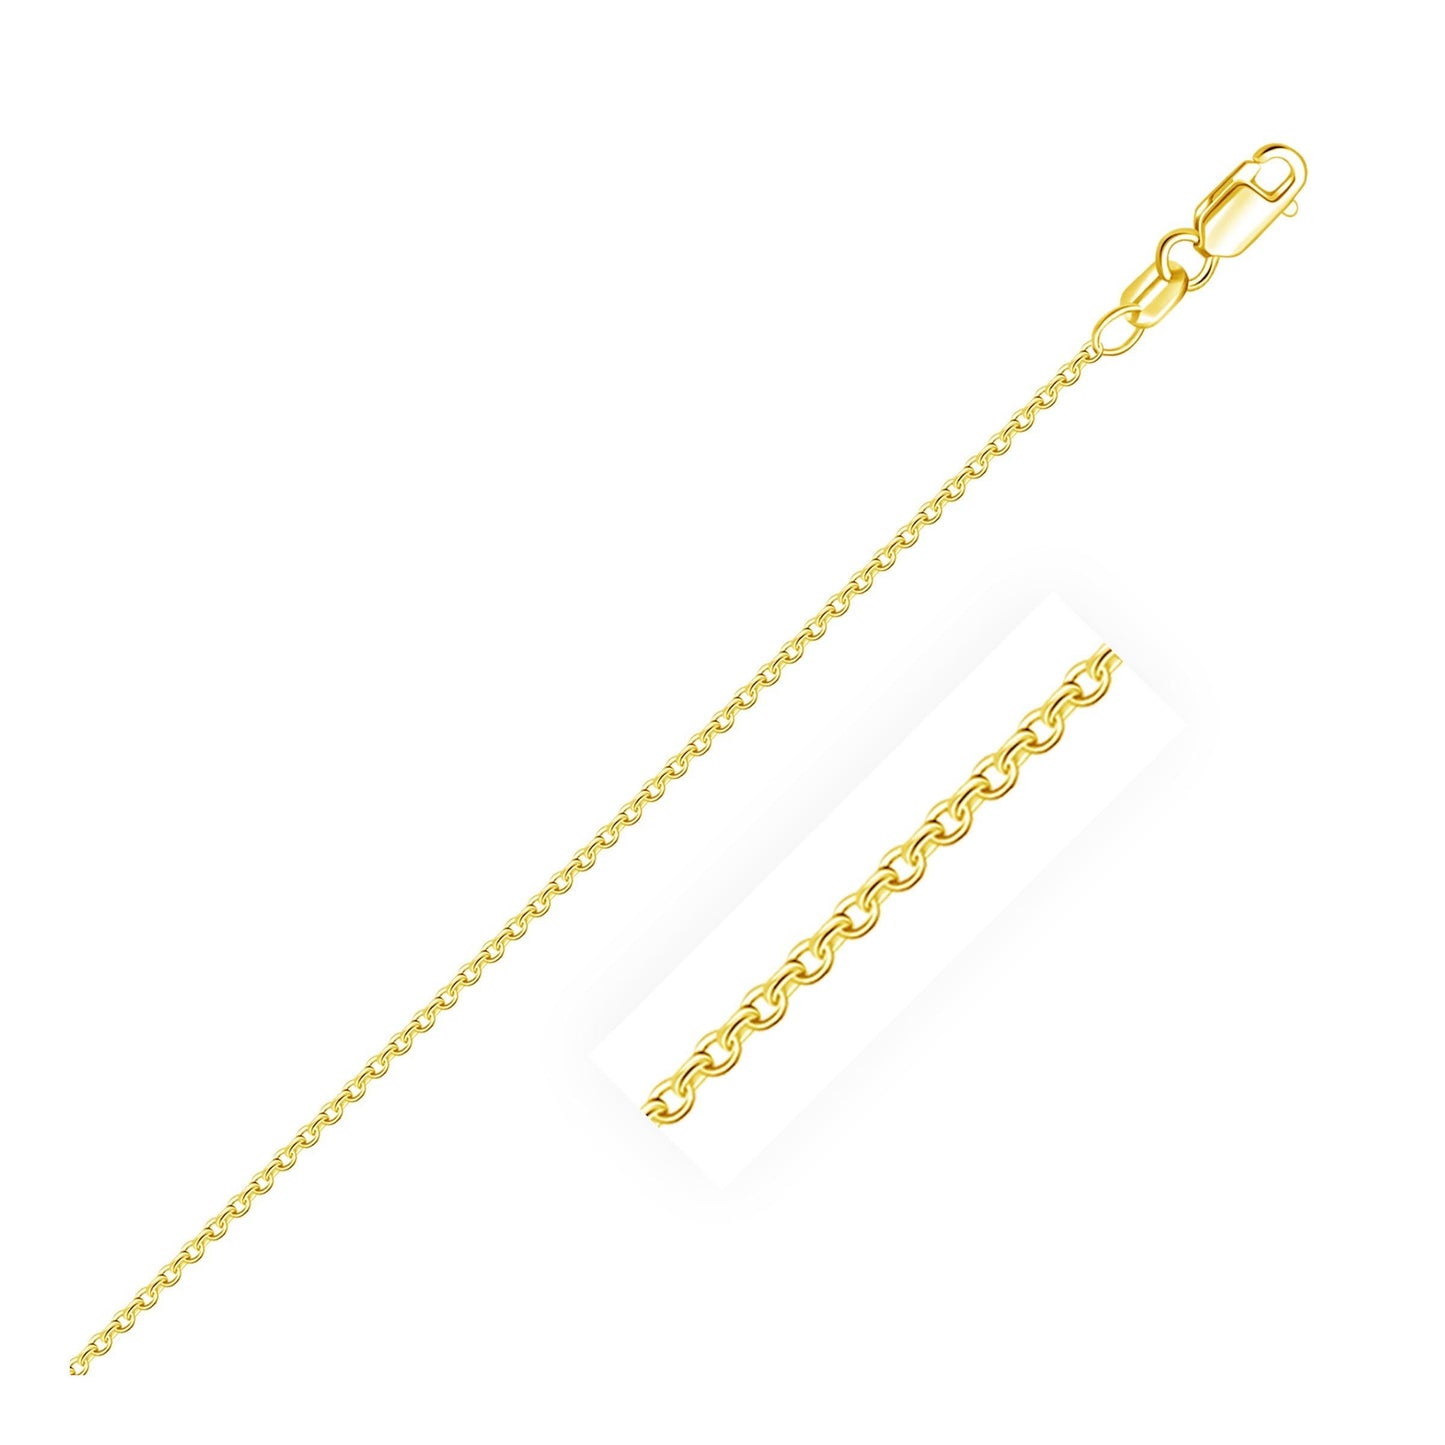 14k Yellow Gold Round Cable Link Chain in 1.5 mm